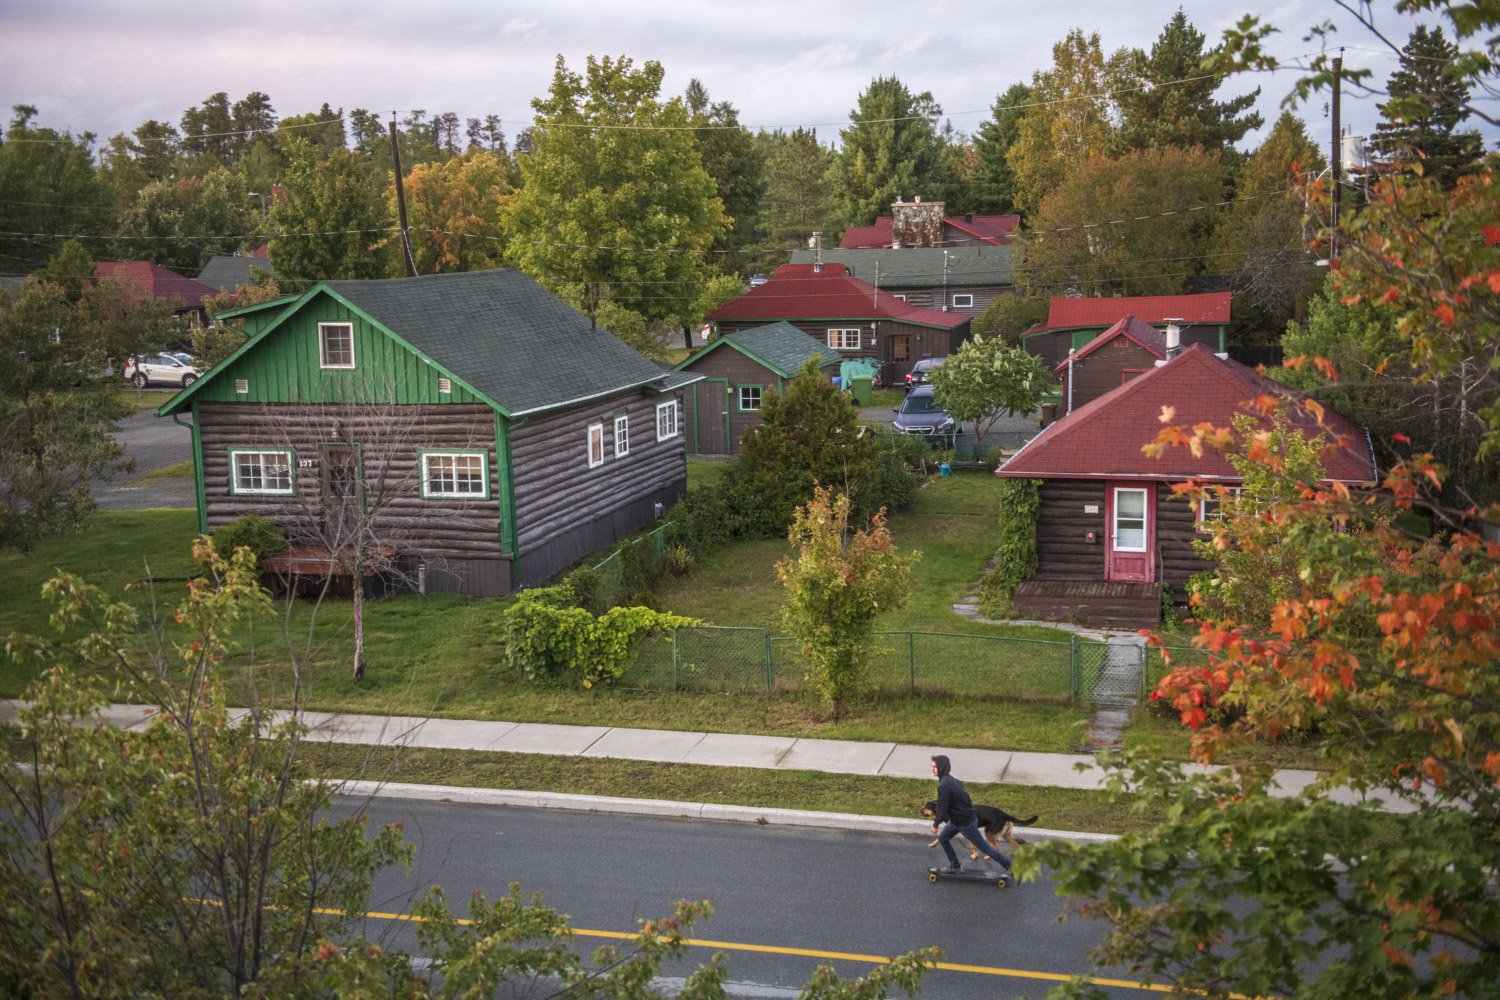  Built in the 1930s, the 22-hectare former company town exhibits unique features such as an orthogonal layout plan, residential land-use based on social hierarchy, and distinct pine log style architectures.  Since 1968, the village has become a neigh